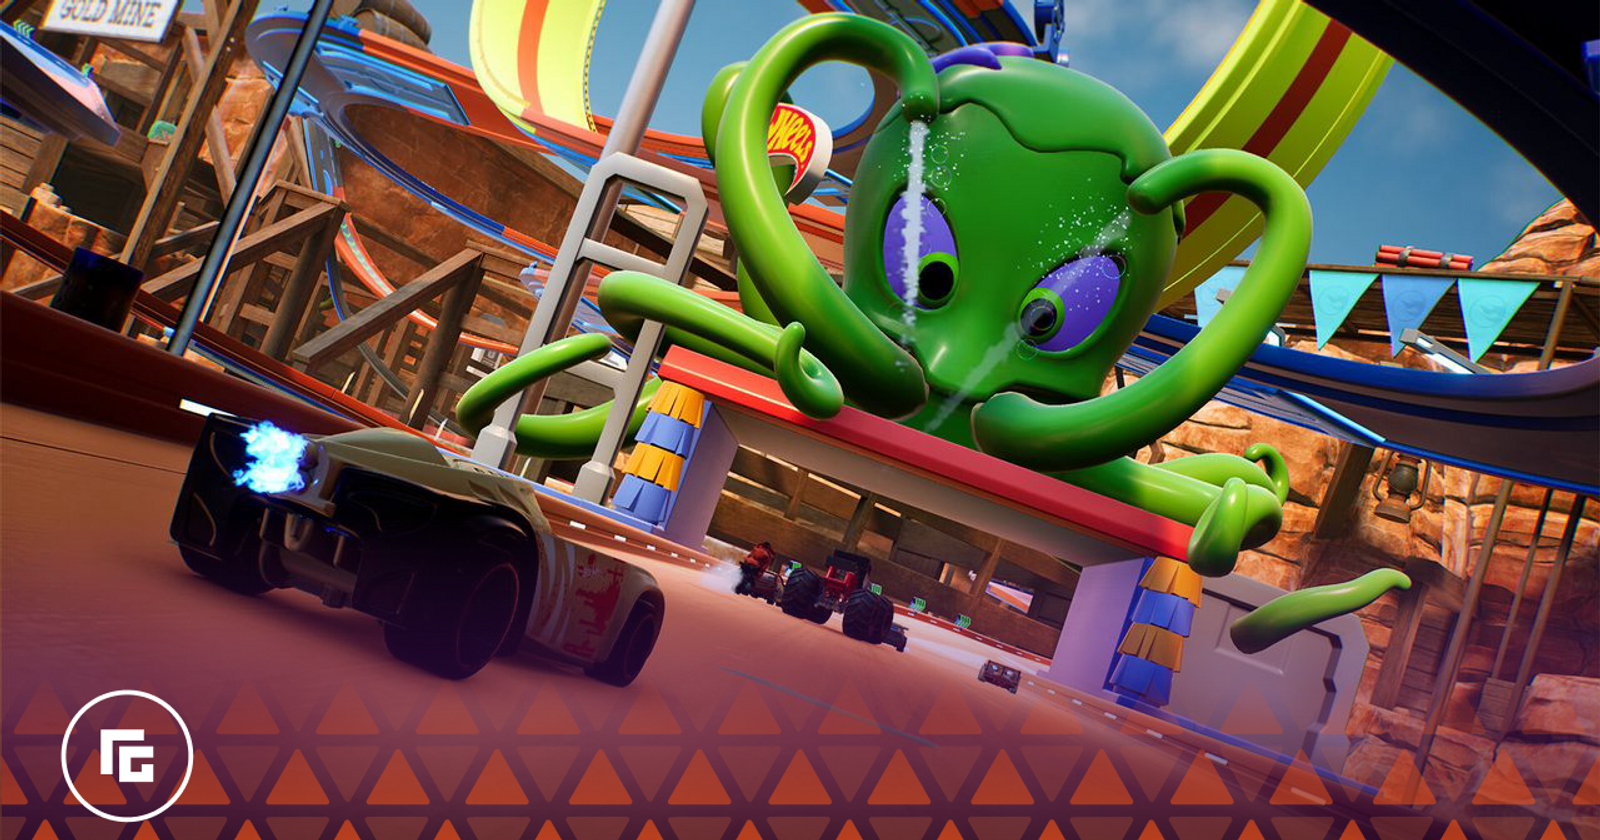 Hot Wheels Unleashed now features cross-platform multiplayer and content